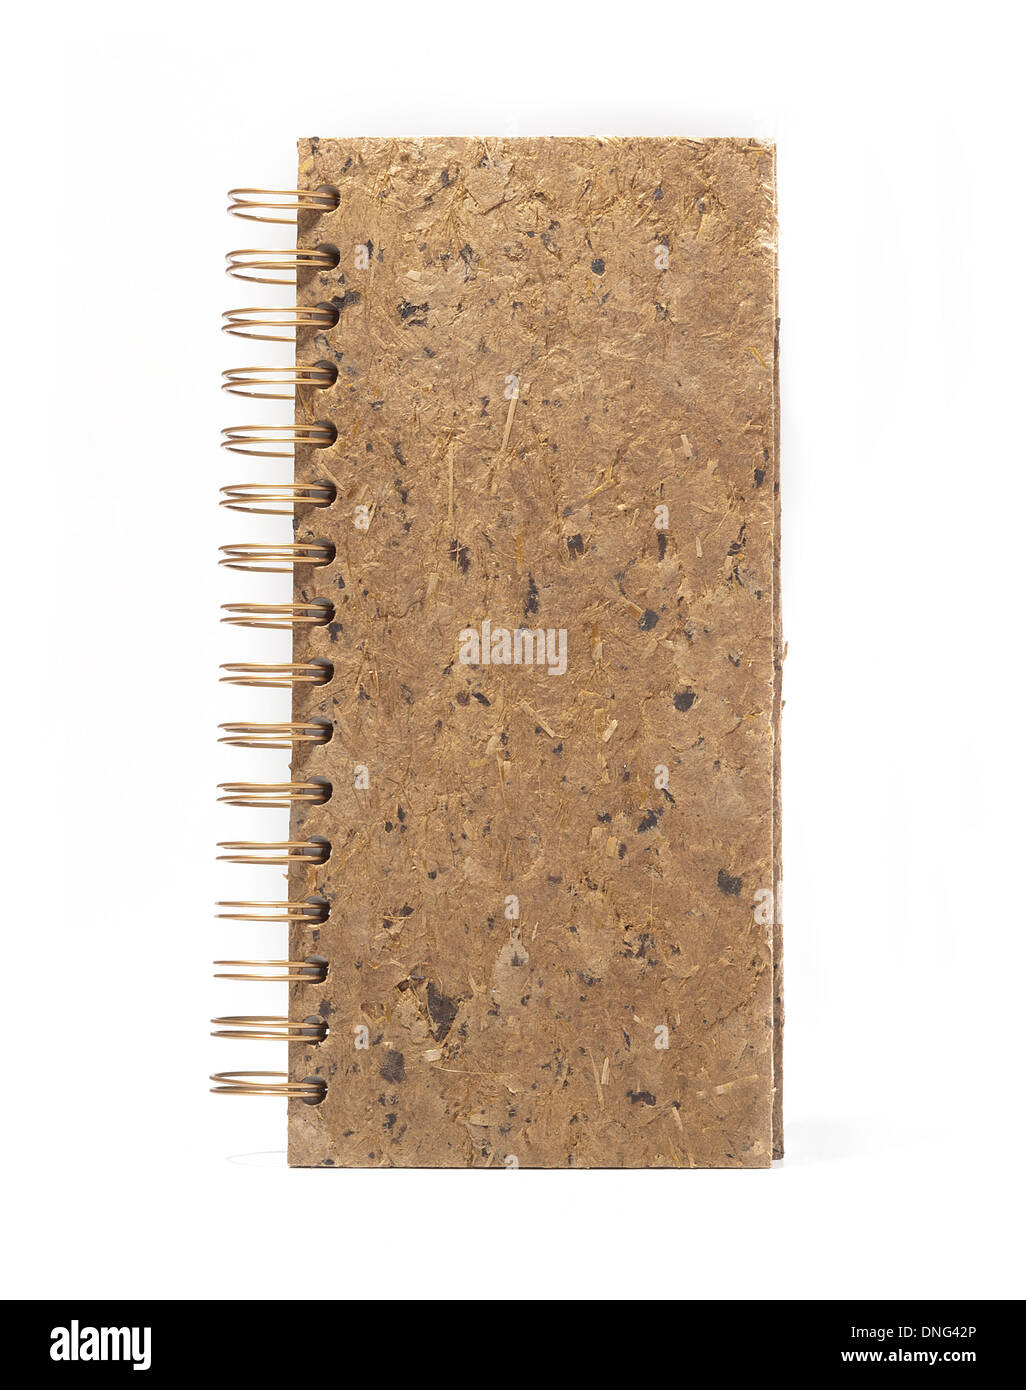 notebook or sketchpad, with handmade straw pulp cover Stock Photo